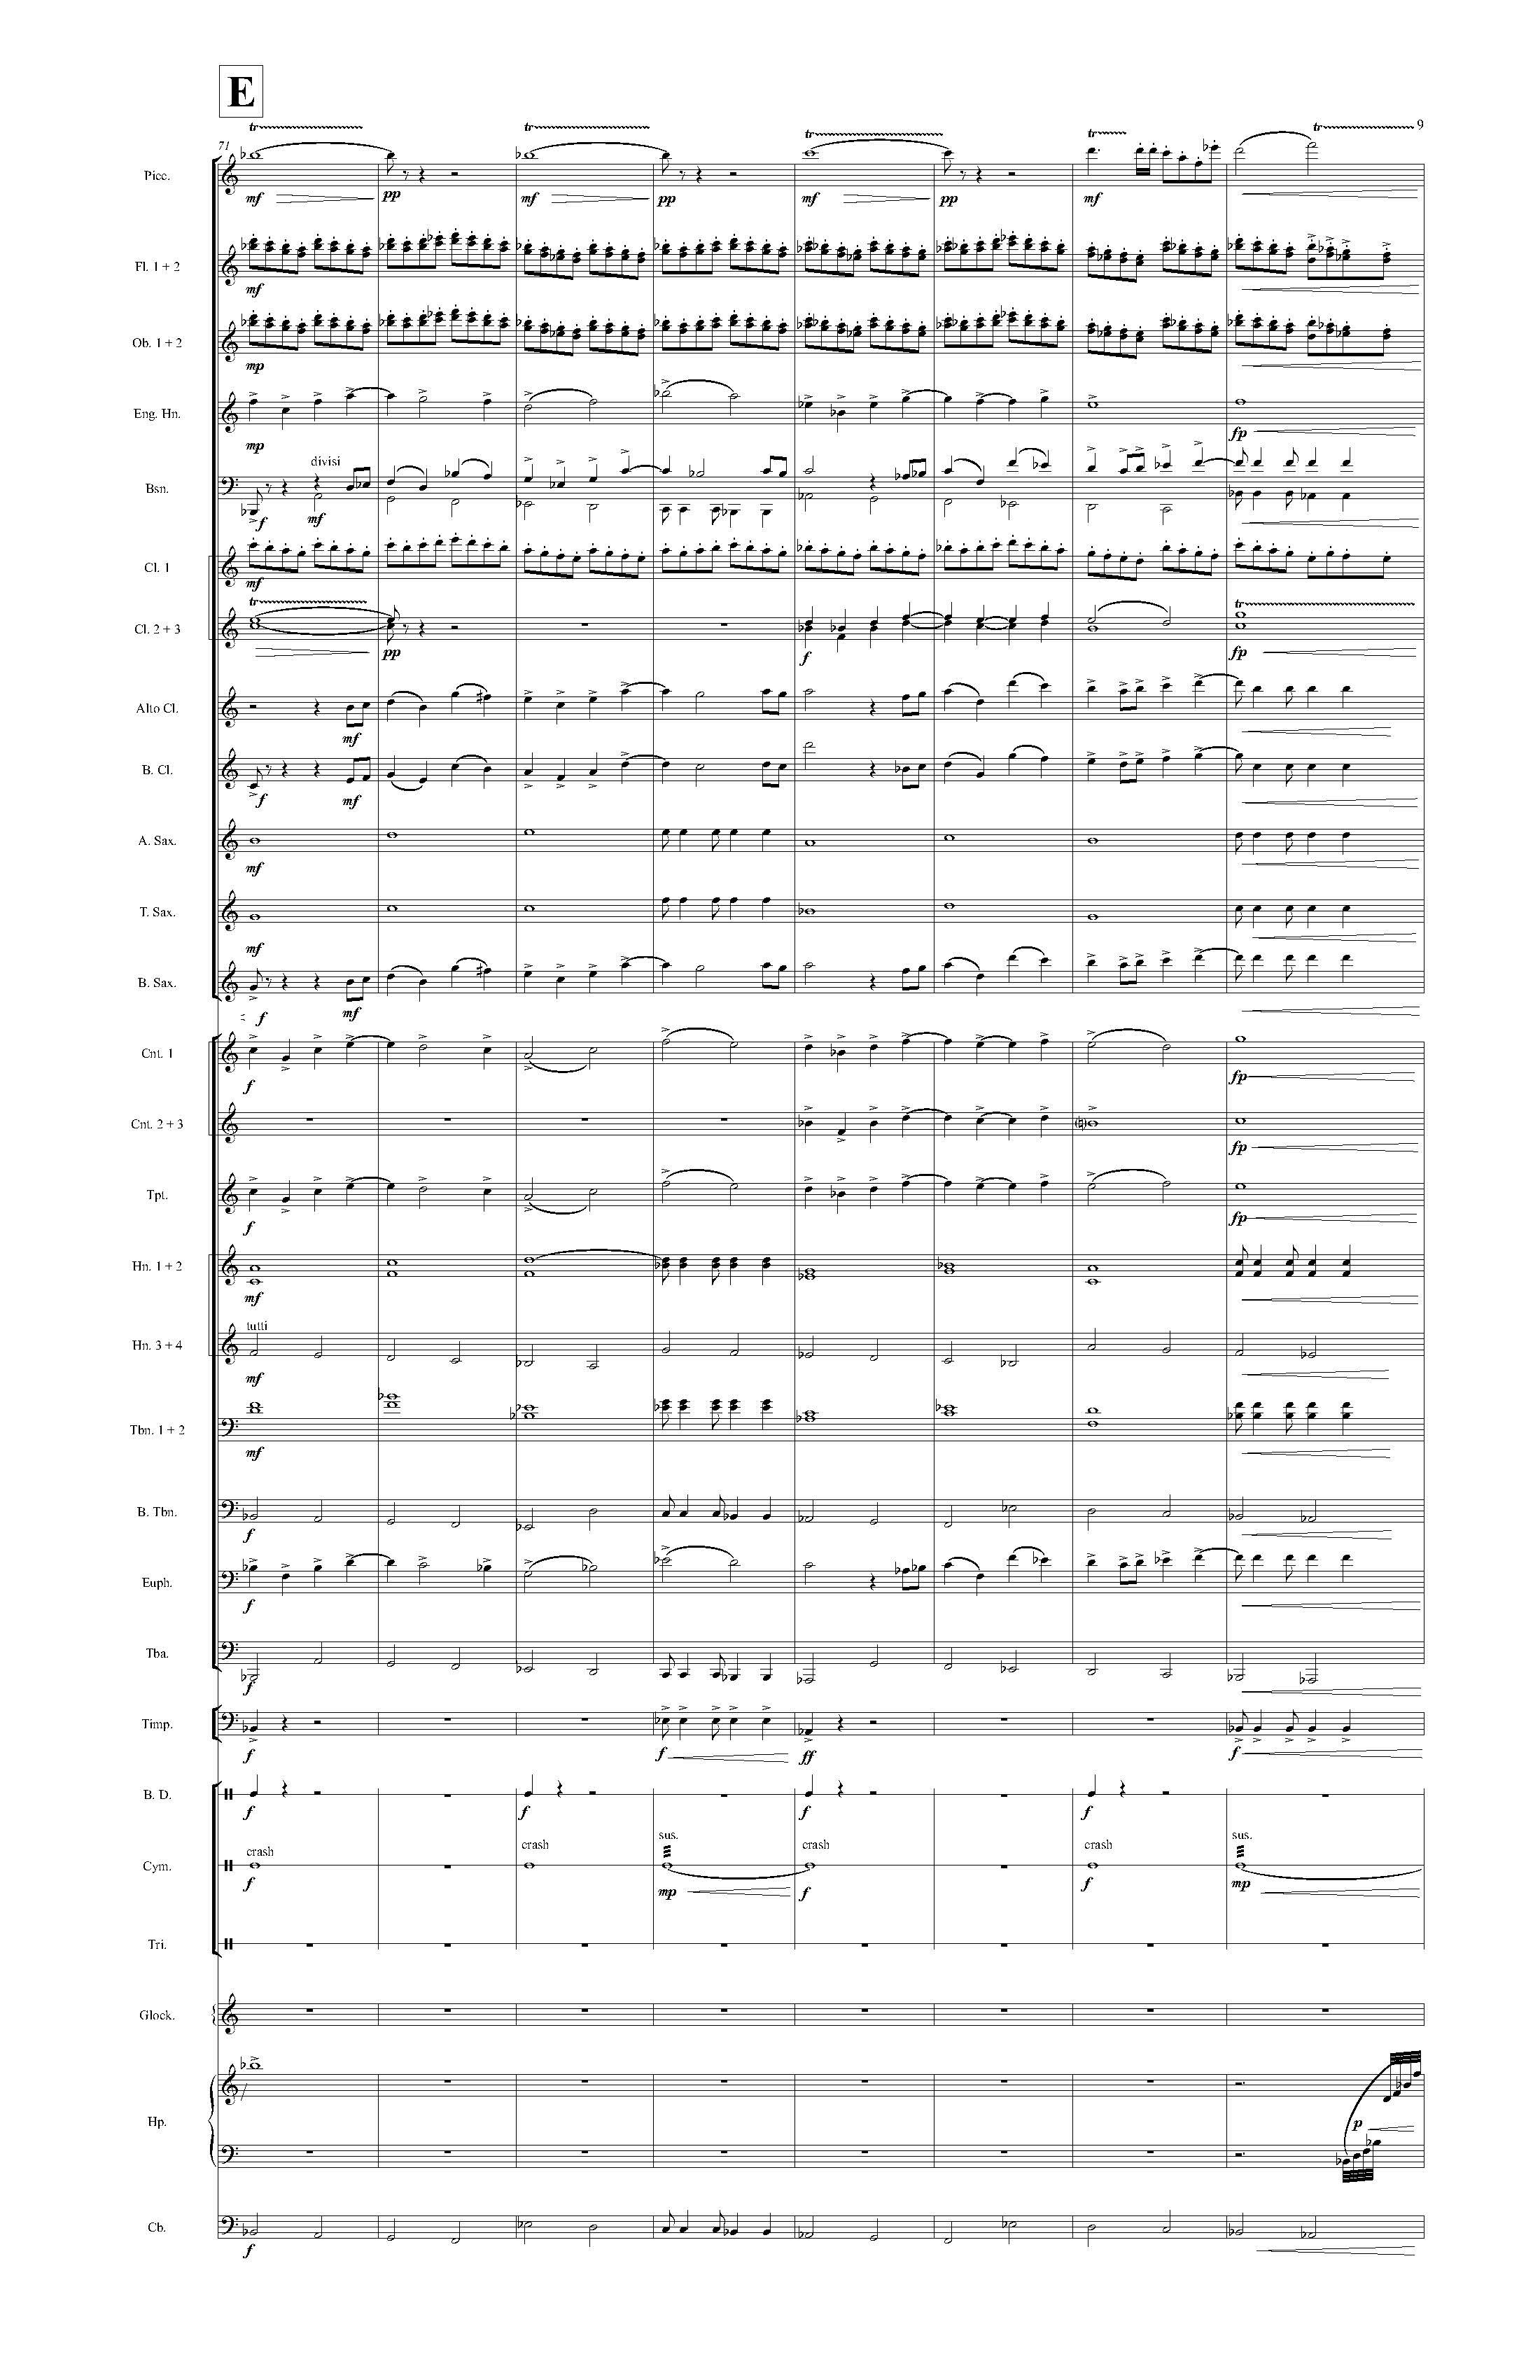 Psyche - Complete Score_Page_15.jpg